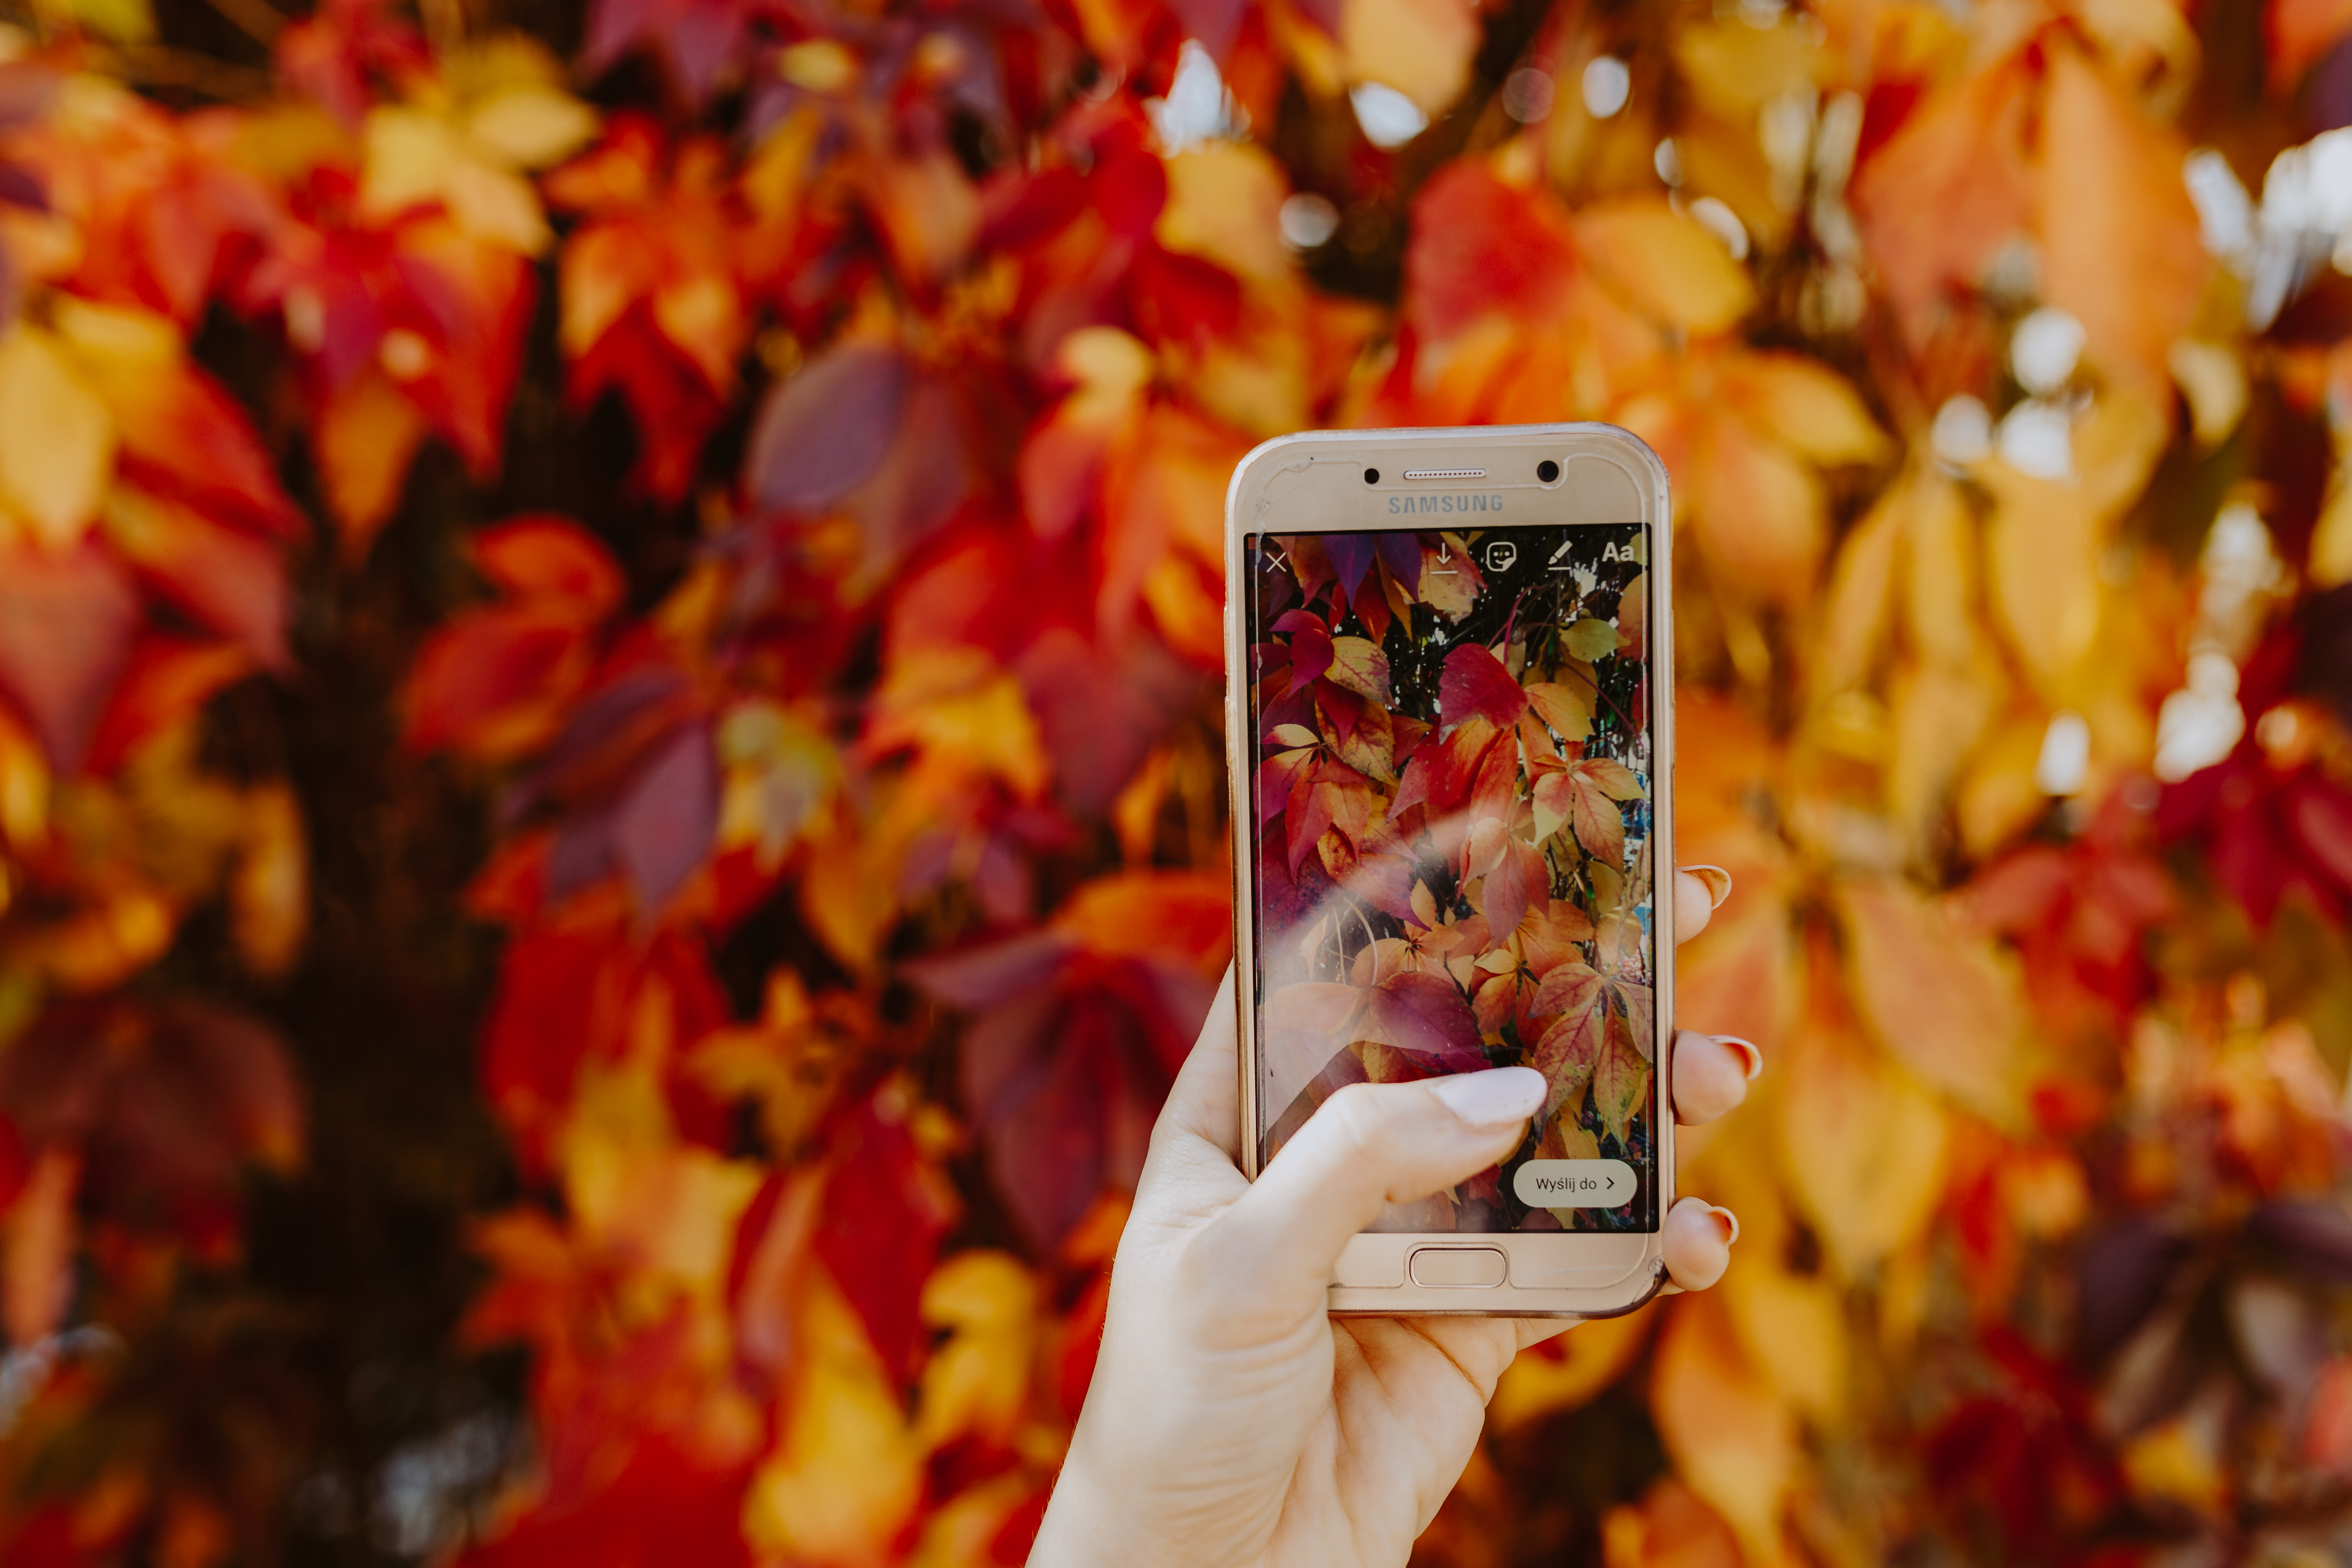 The woman takes a picture of the autumn leaves with her phone